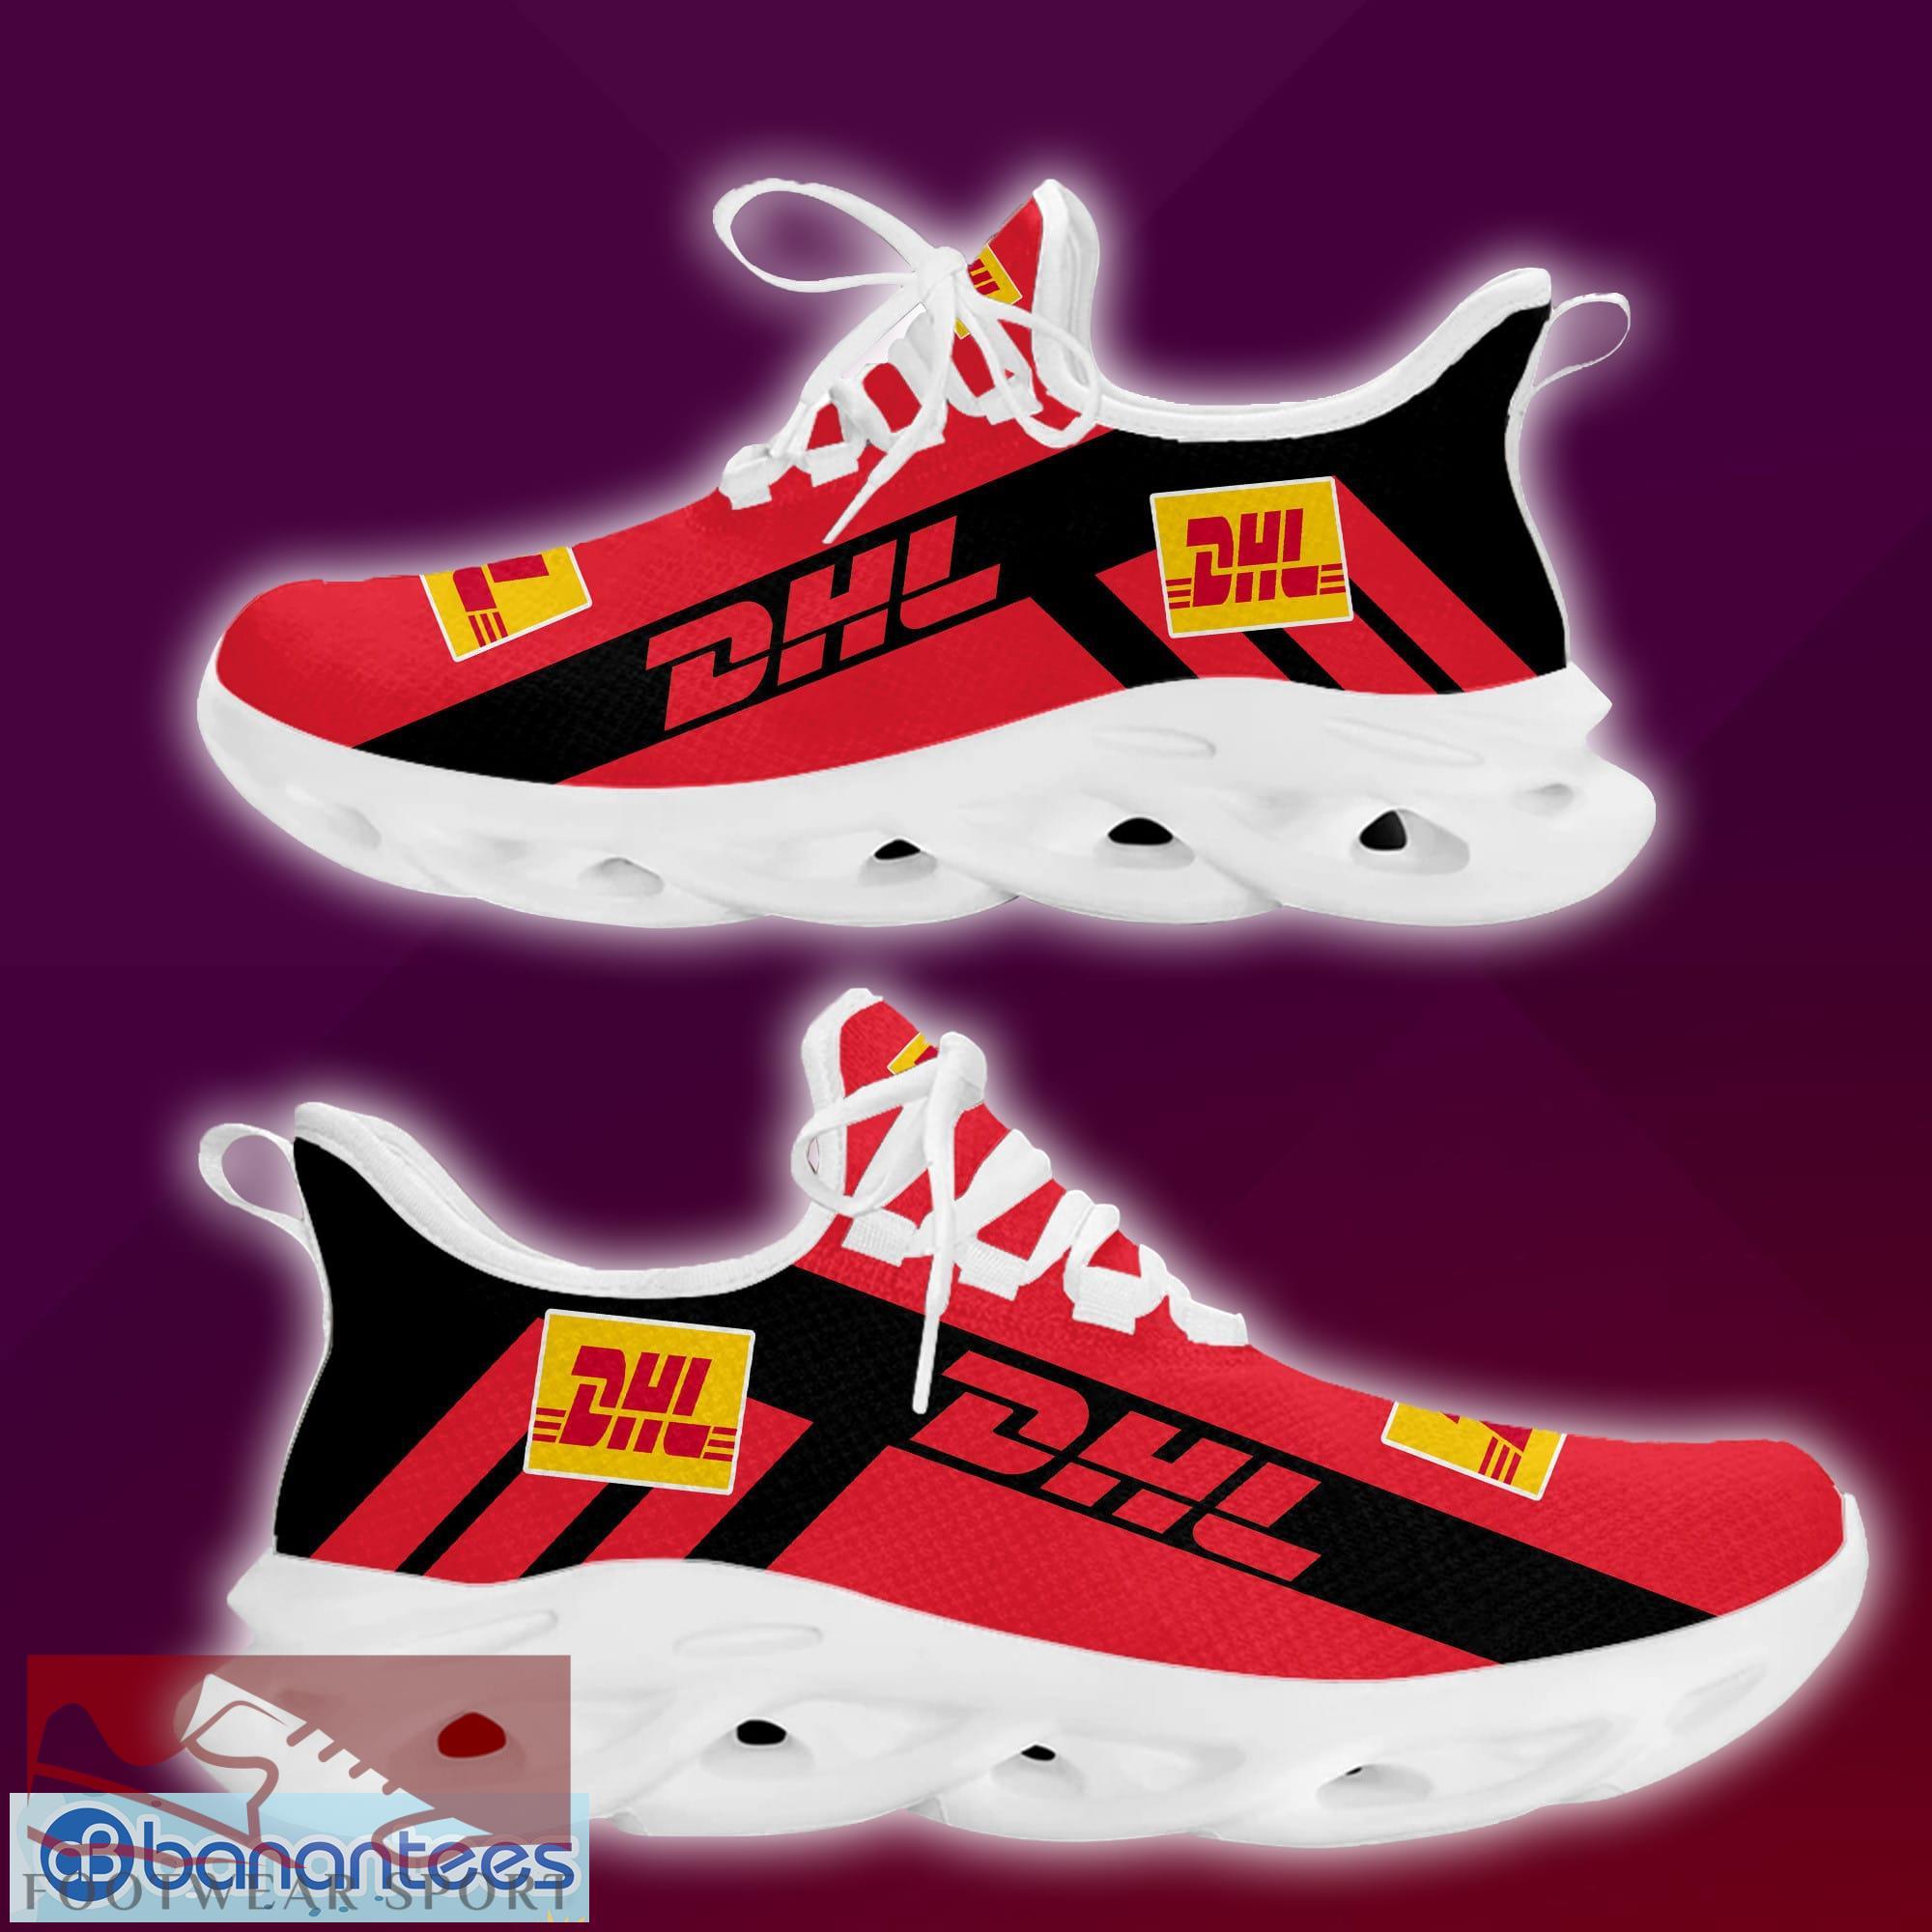 dhl Brand New Logo Max Soul Sneakers Unconventional Running Shoes Gift - dhl New Brand Chunky Shoes Style Max Soul Sneakers Photo 2